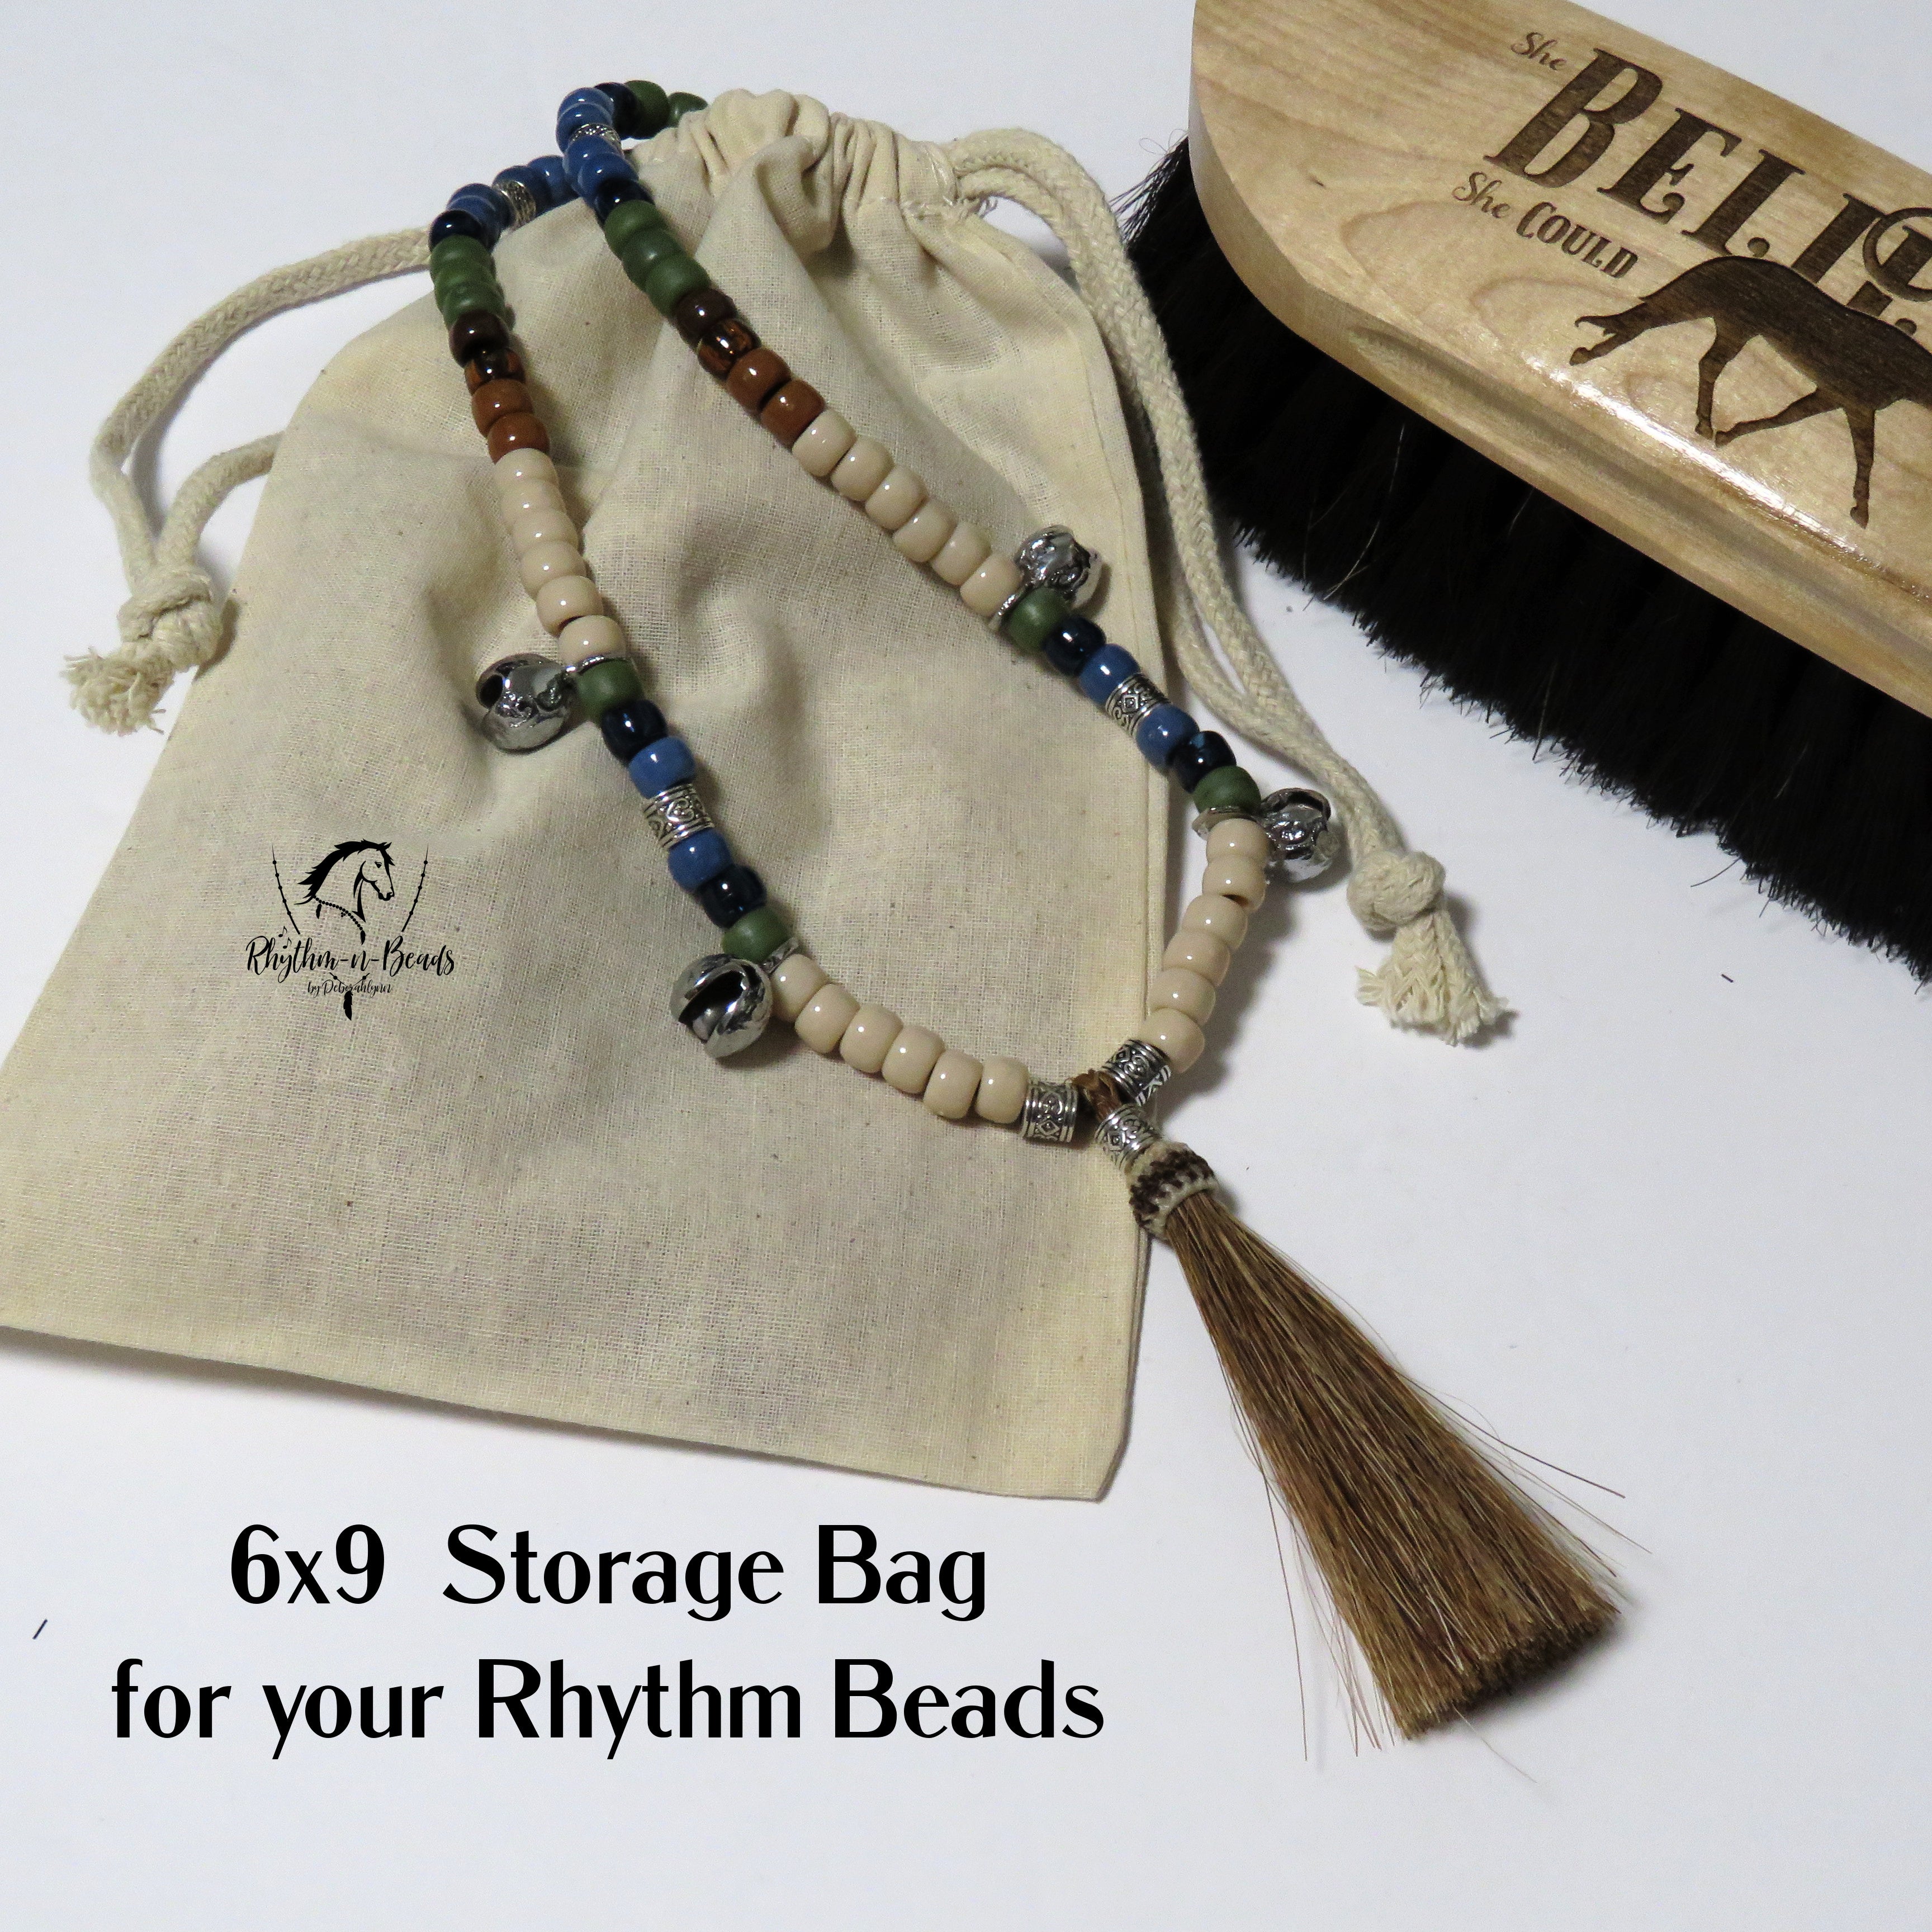 STORAGE BAGS for your Rhythm Beads